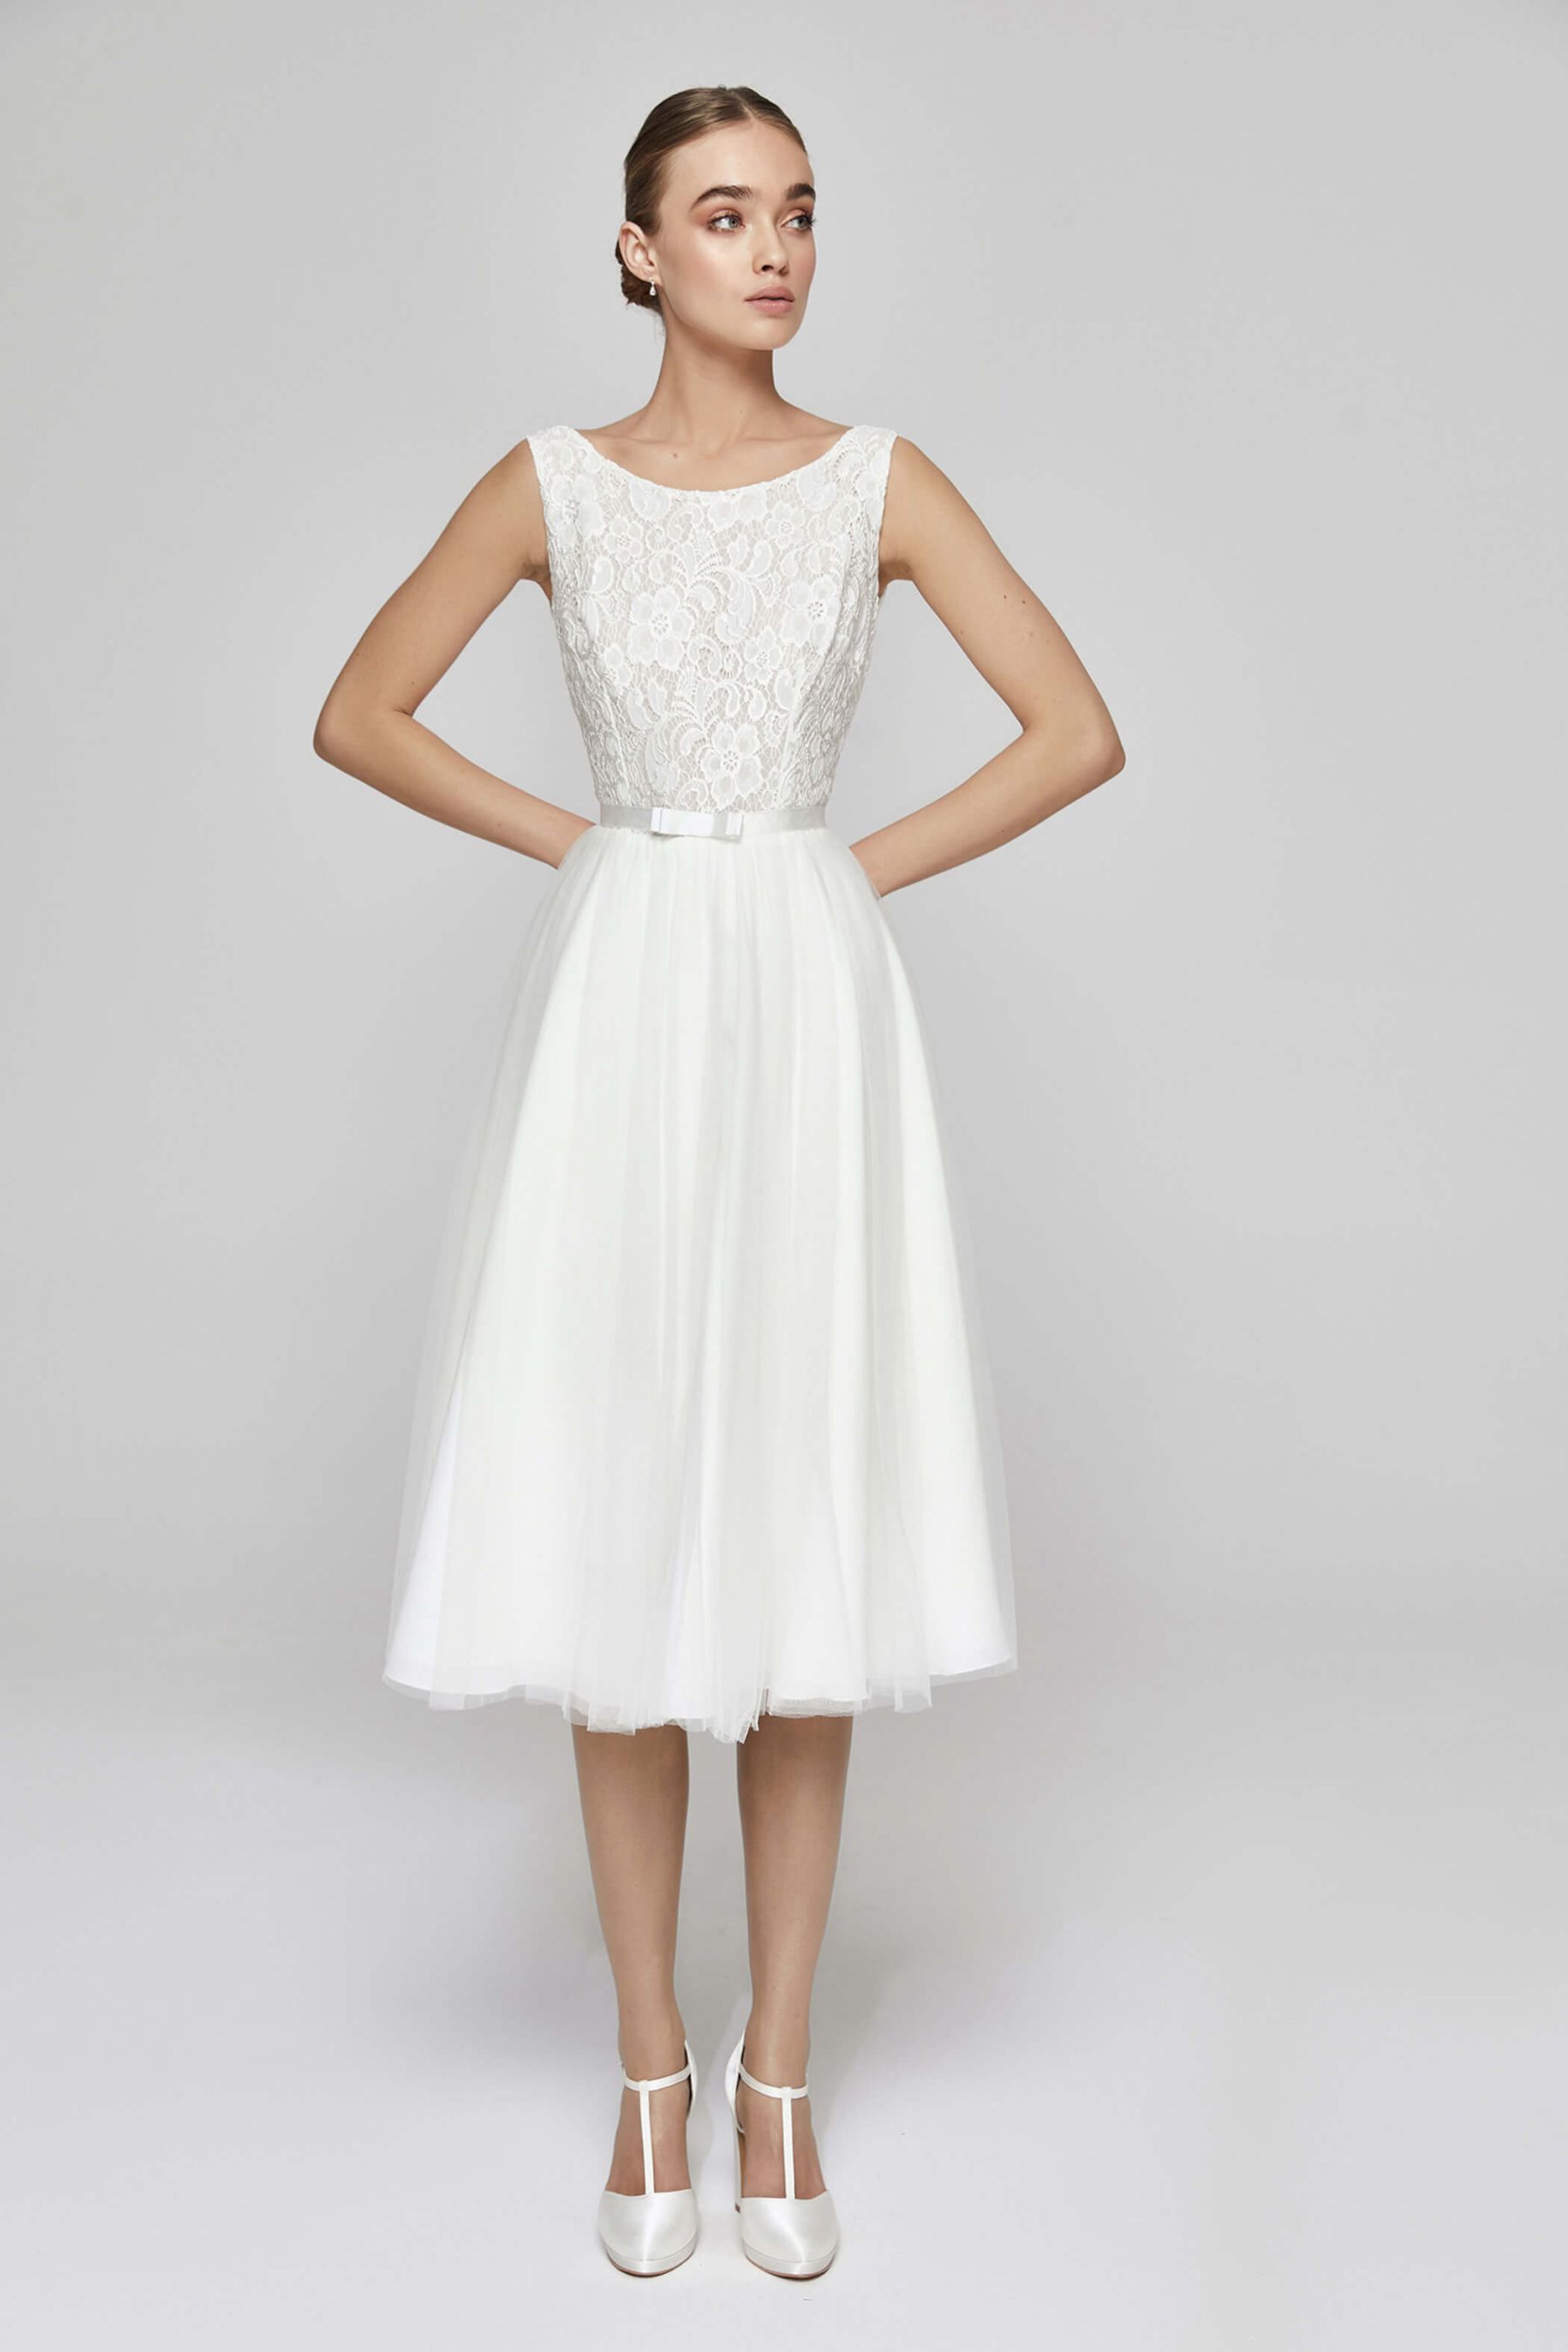 Explore short A-line boat neck lace & tulle wedding dress at Bride Now